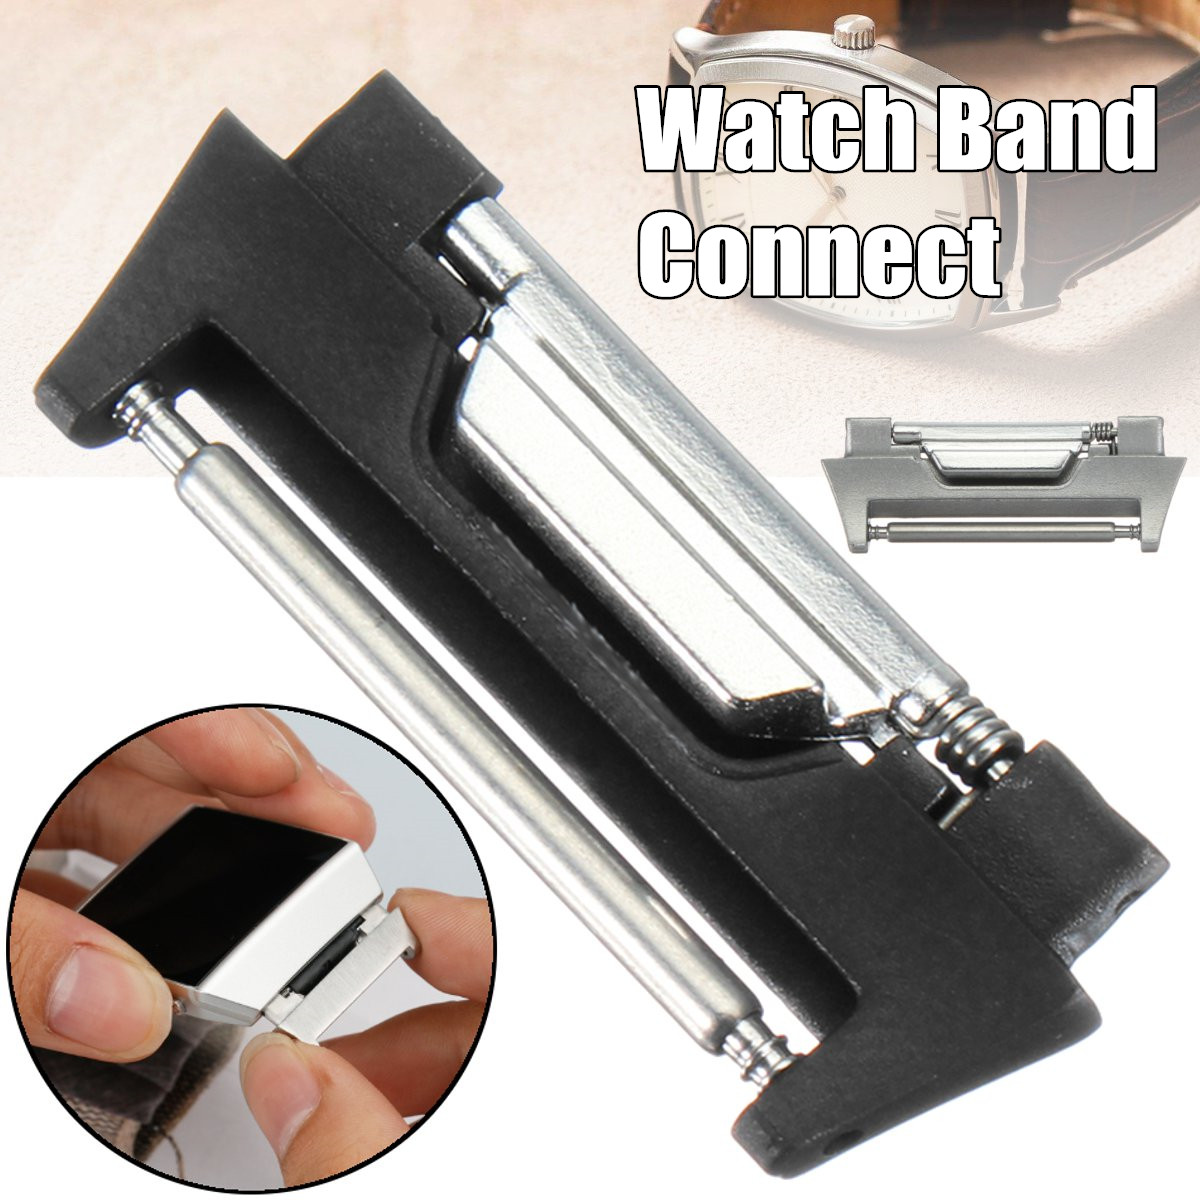 1Pcs-Stainless-Steel-Watch-Band-Connect-for-Fitbit-Ionic-Smart-Watch-1238868